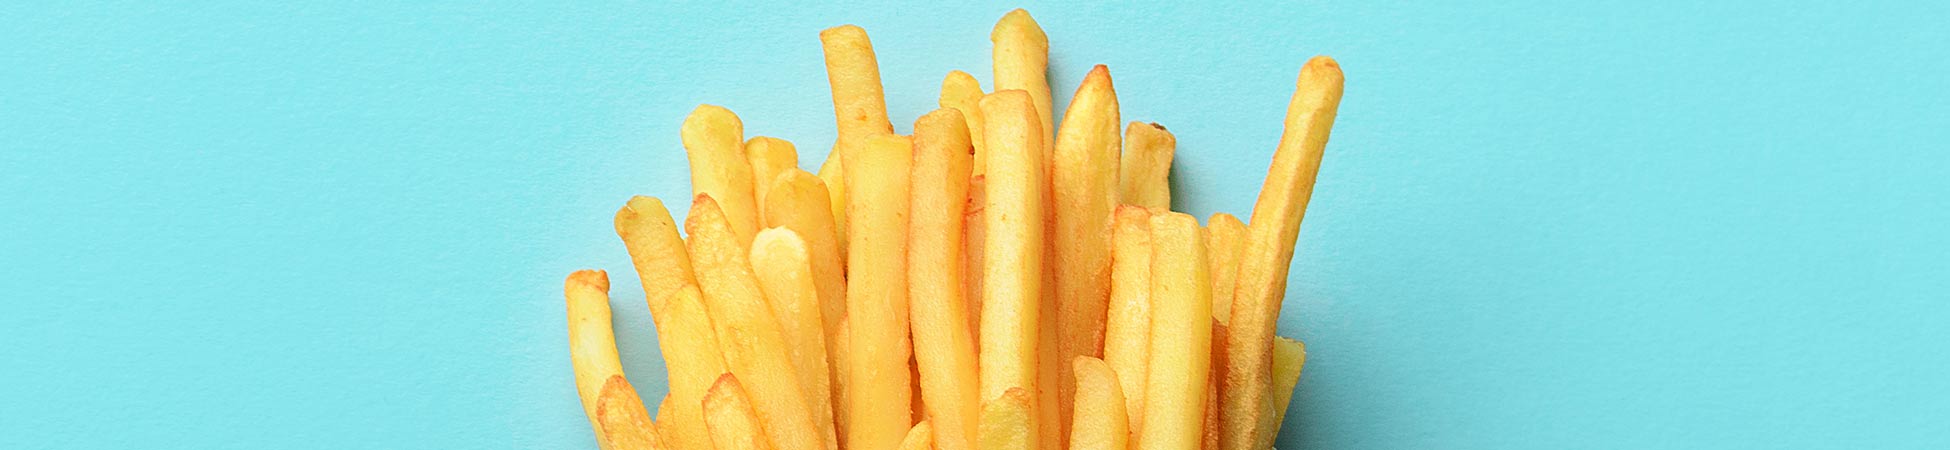 The perfect portion of French fries in the world